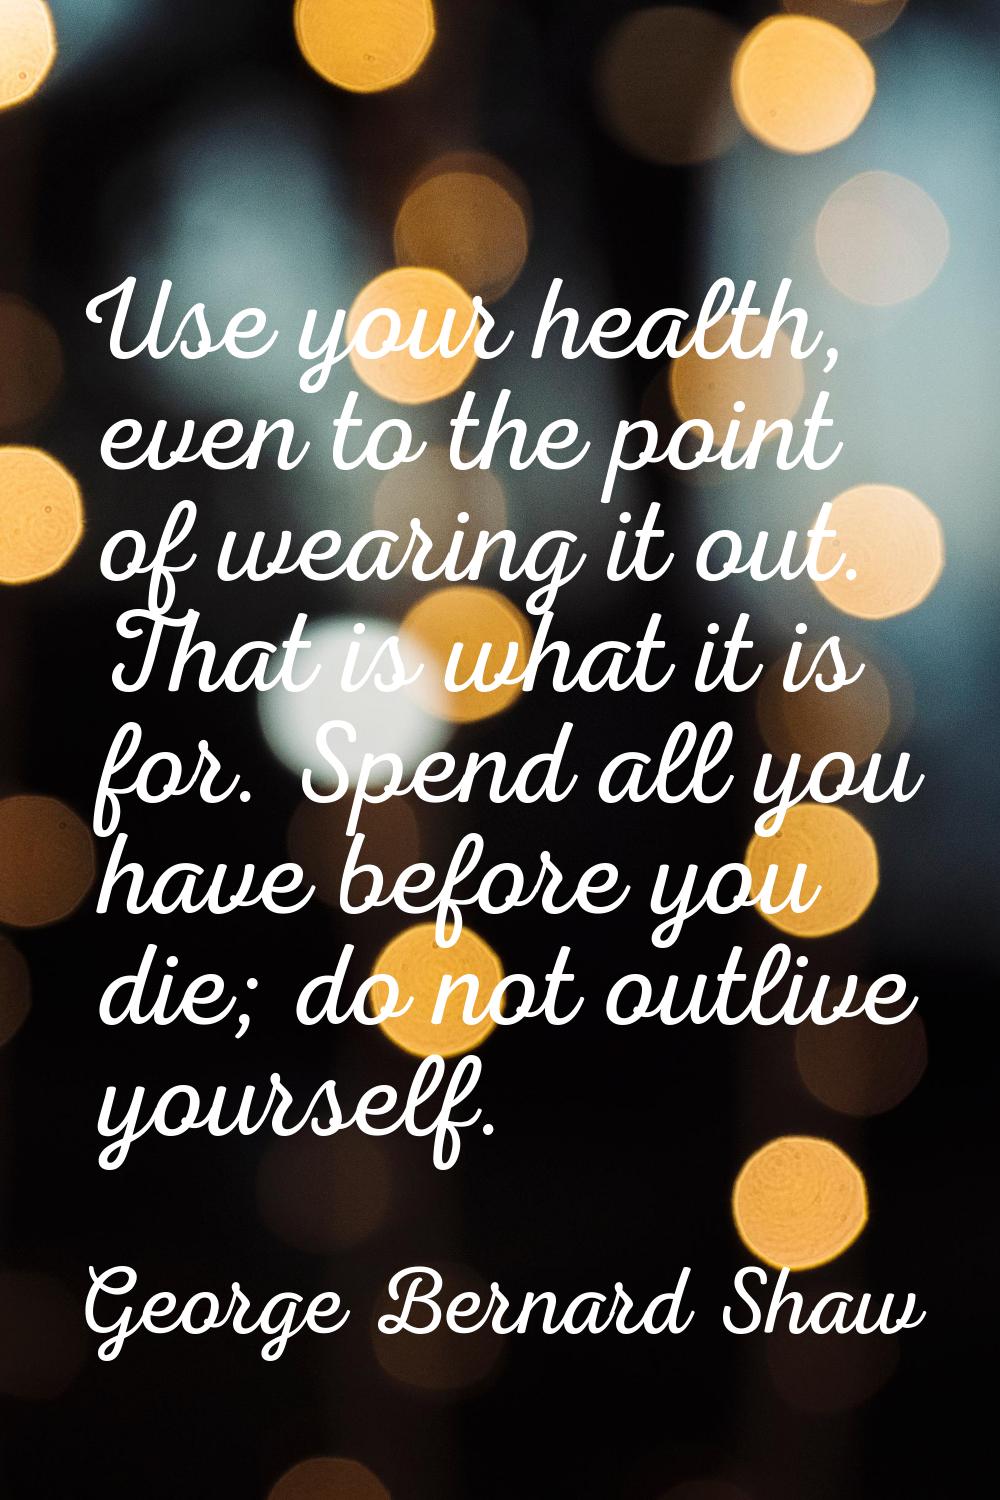 Use your health, even to the point of wearing it out. That is what it is for. Spend all you have be